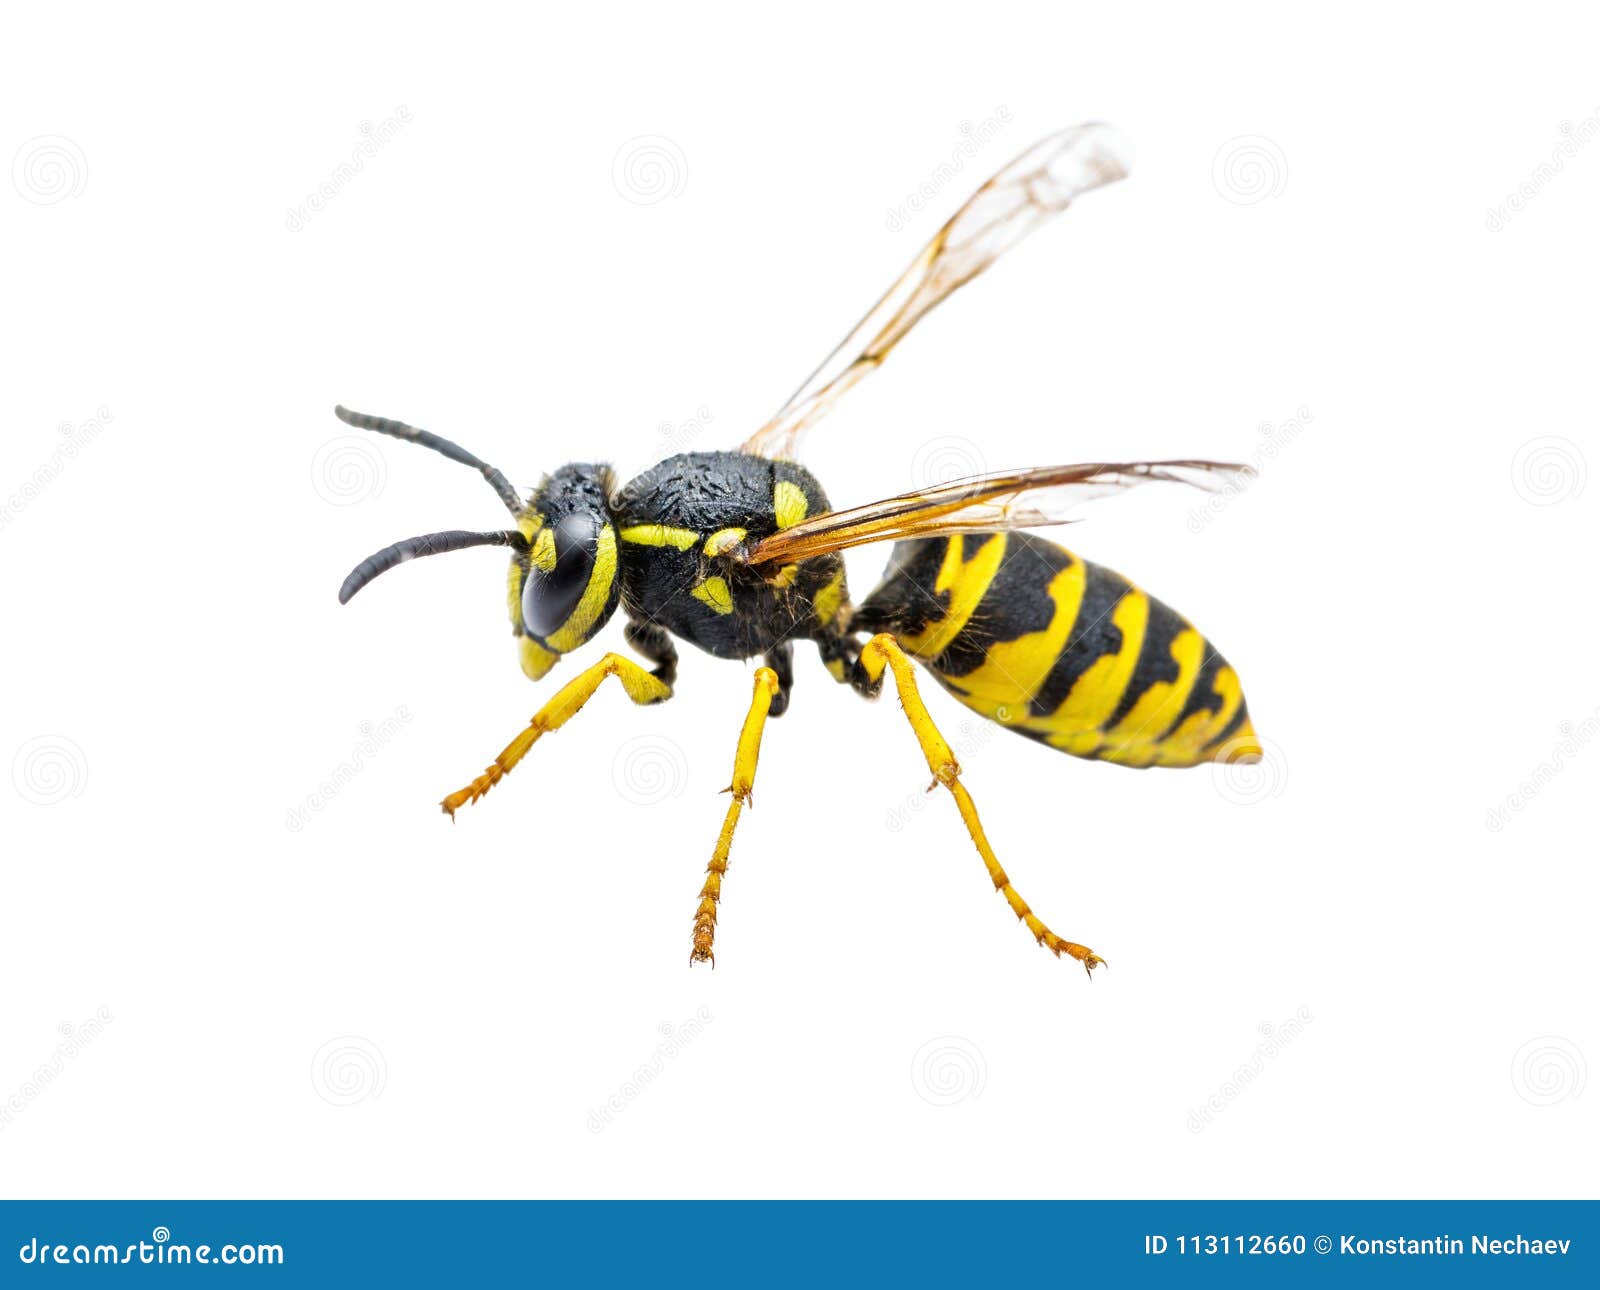 yellow jacket wasp insect  on white